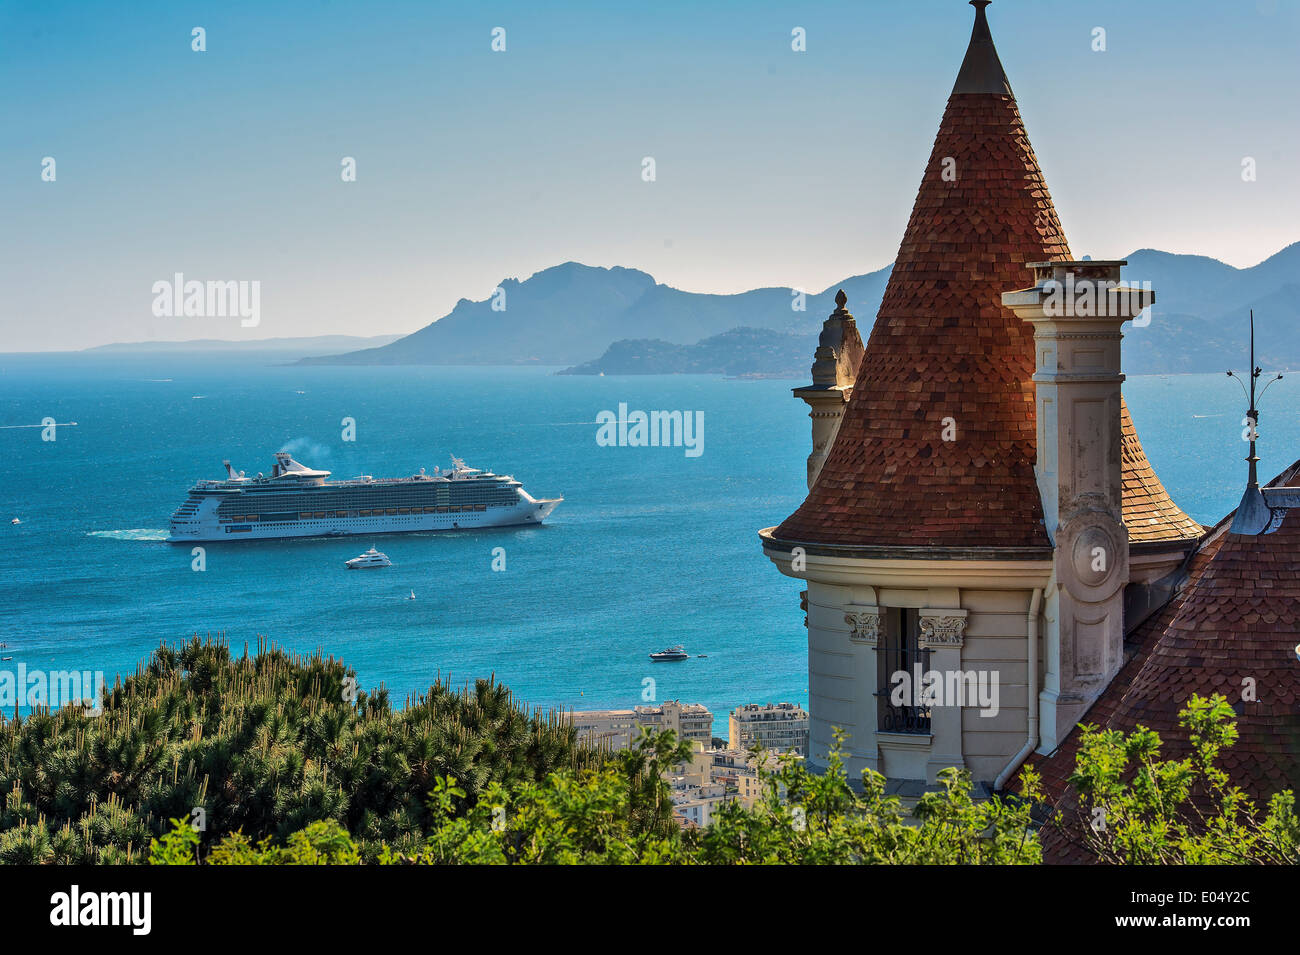 Europe, France, Alpes-Maritimes, Cannes. Cruise ship in a bay of Cannes. Stock Photo